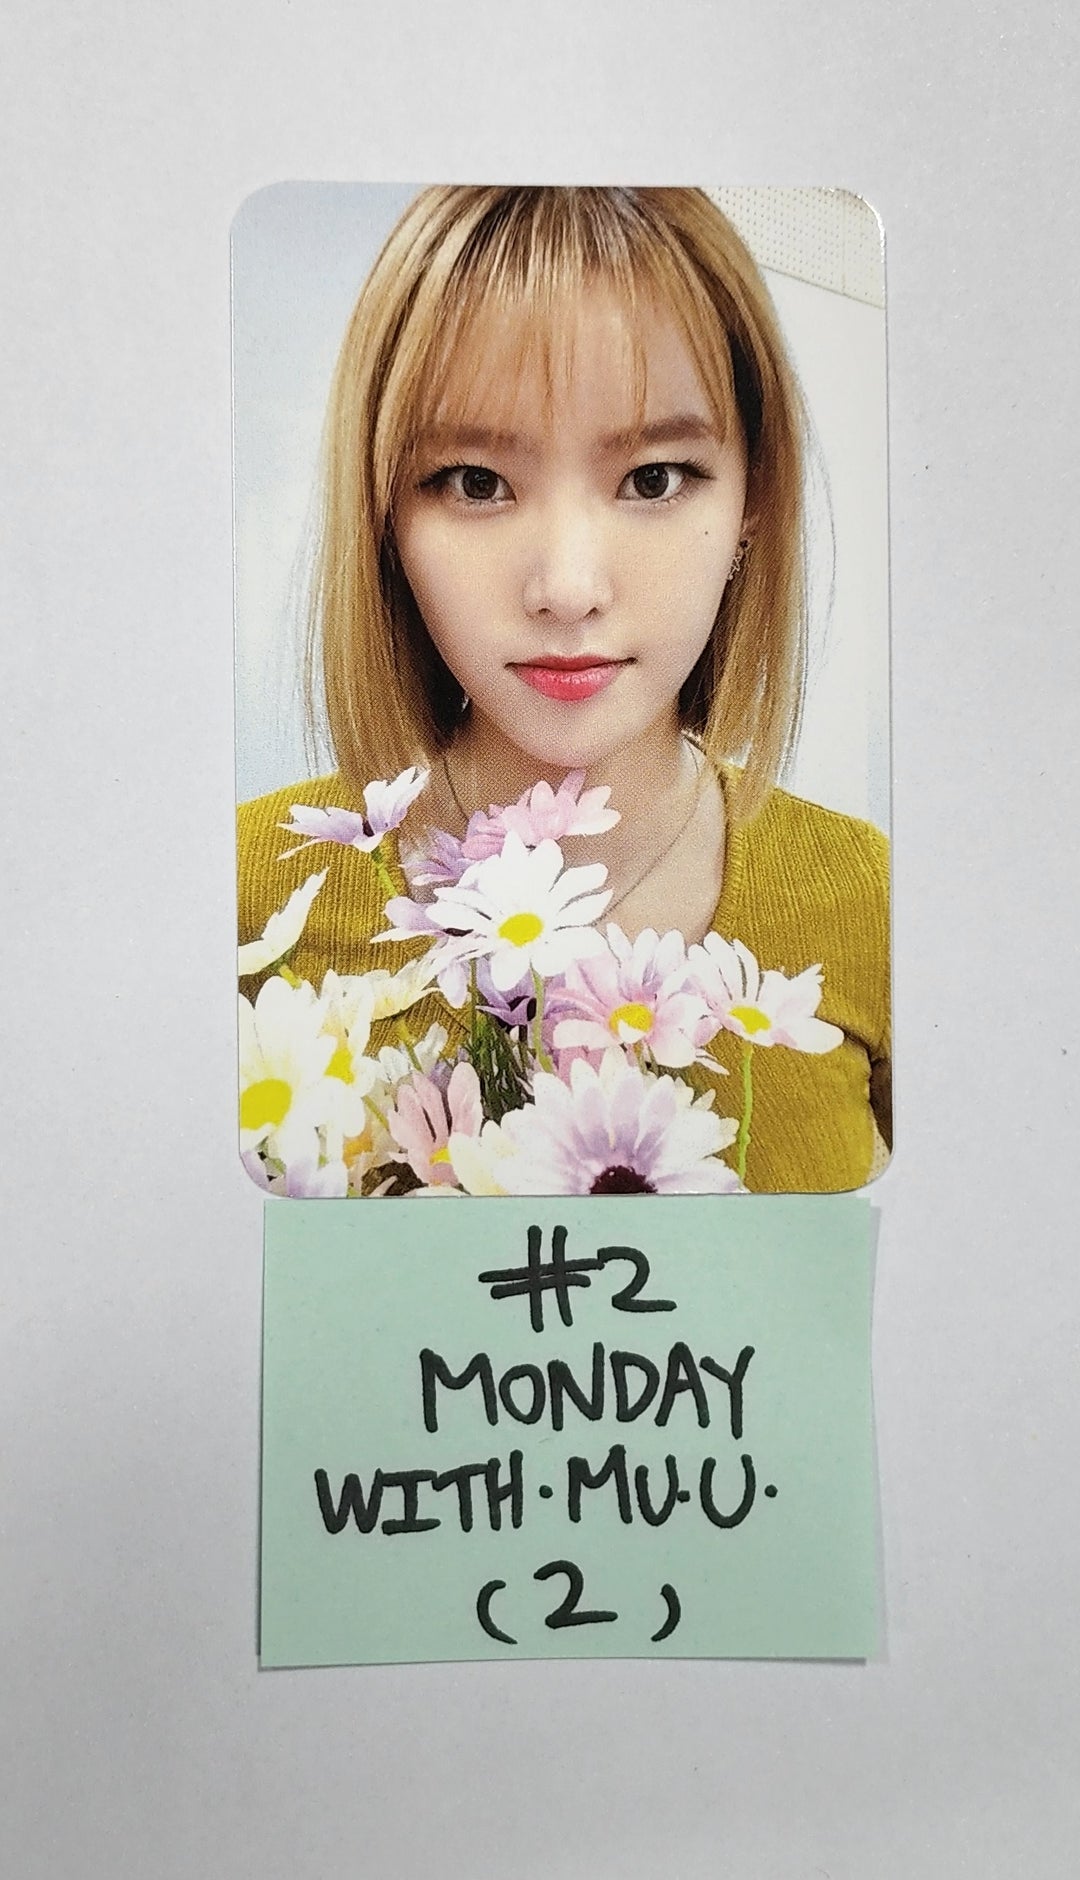 Weeekly "Play Game : AWAKE" - Withmuu Fansign Event Photocard